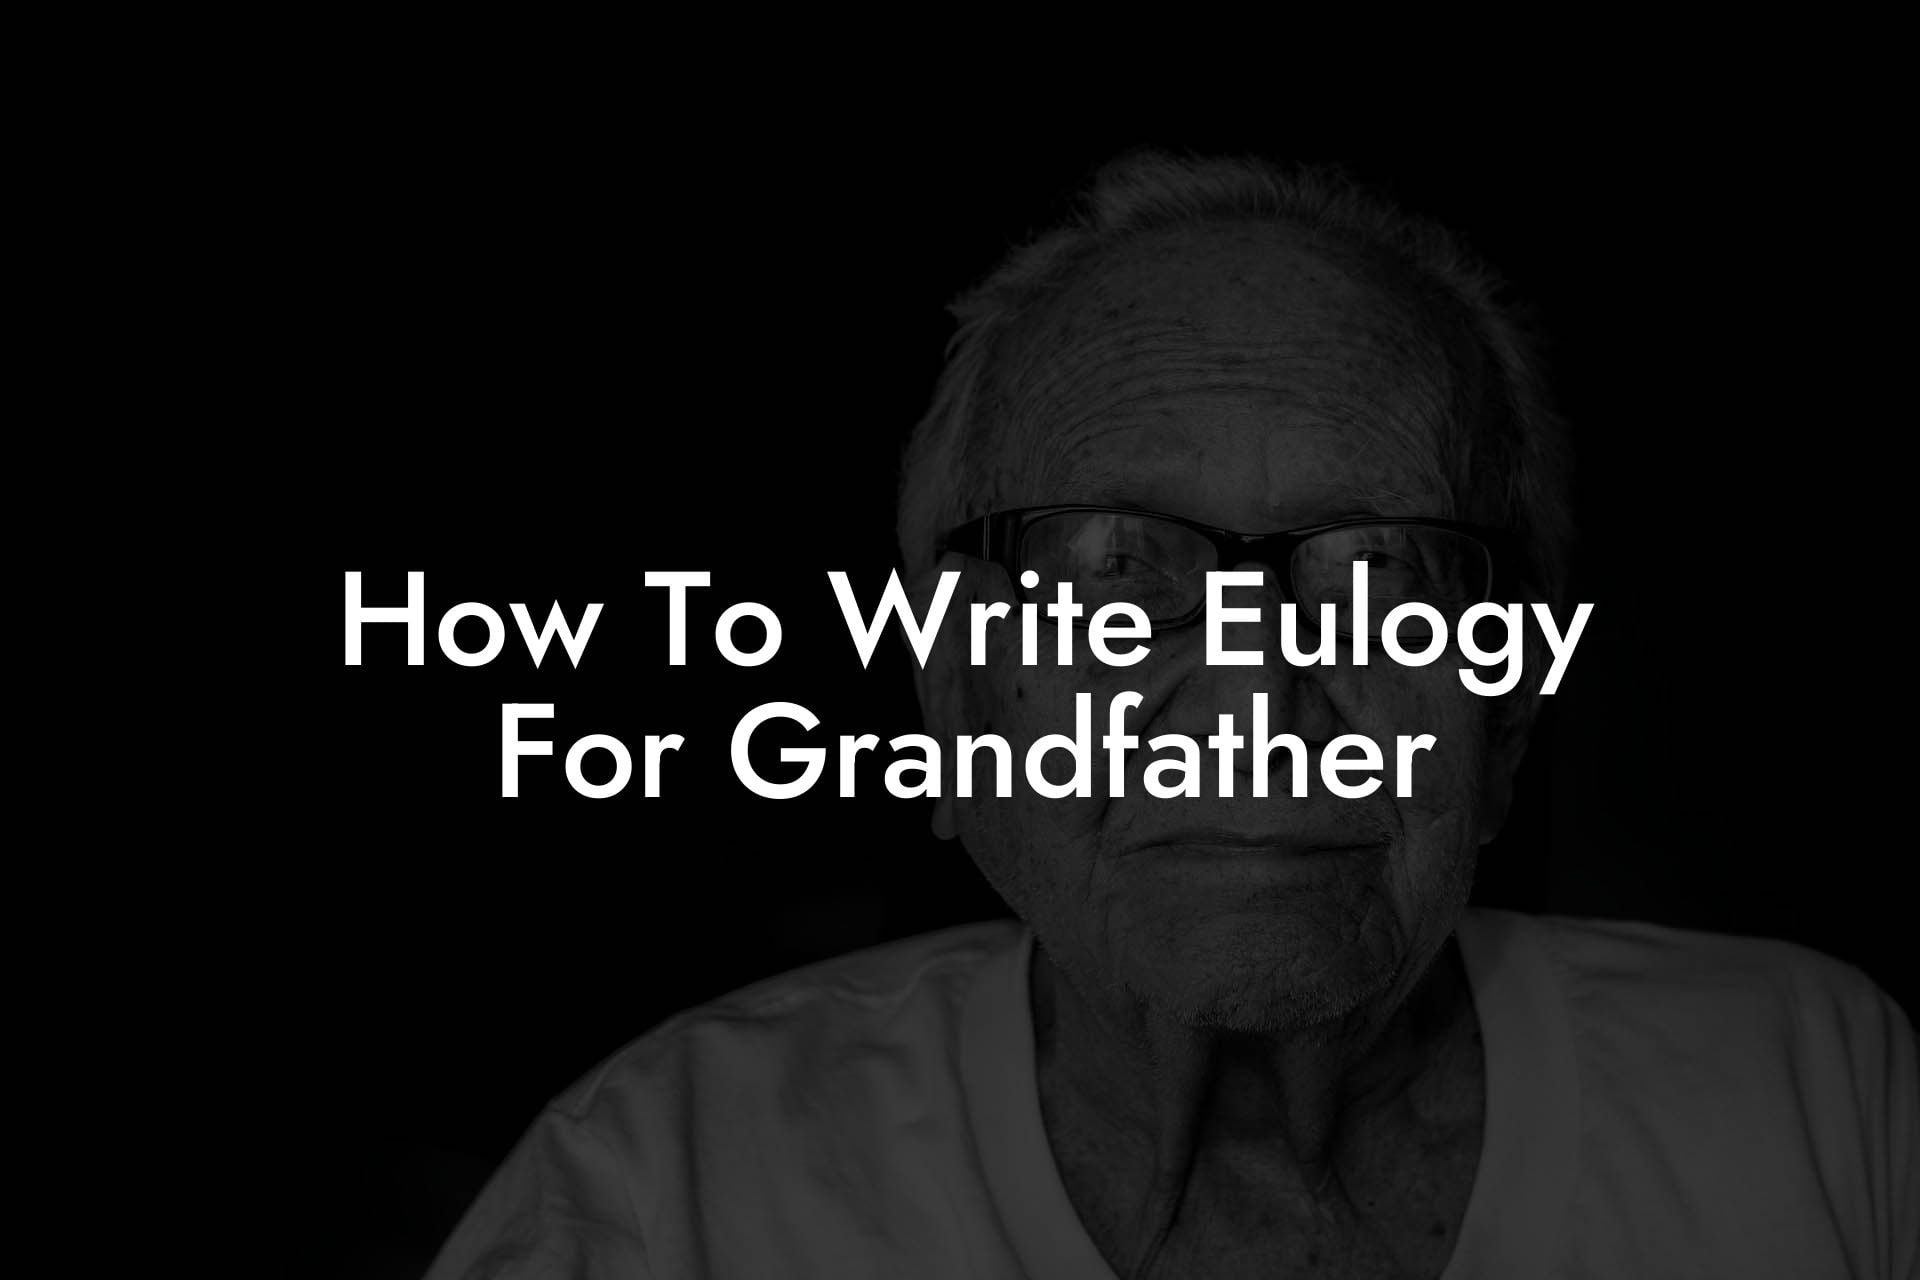 How To Write Eulogy For Grandfather